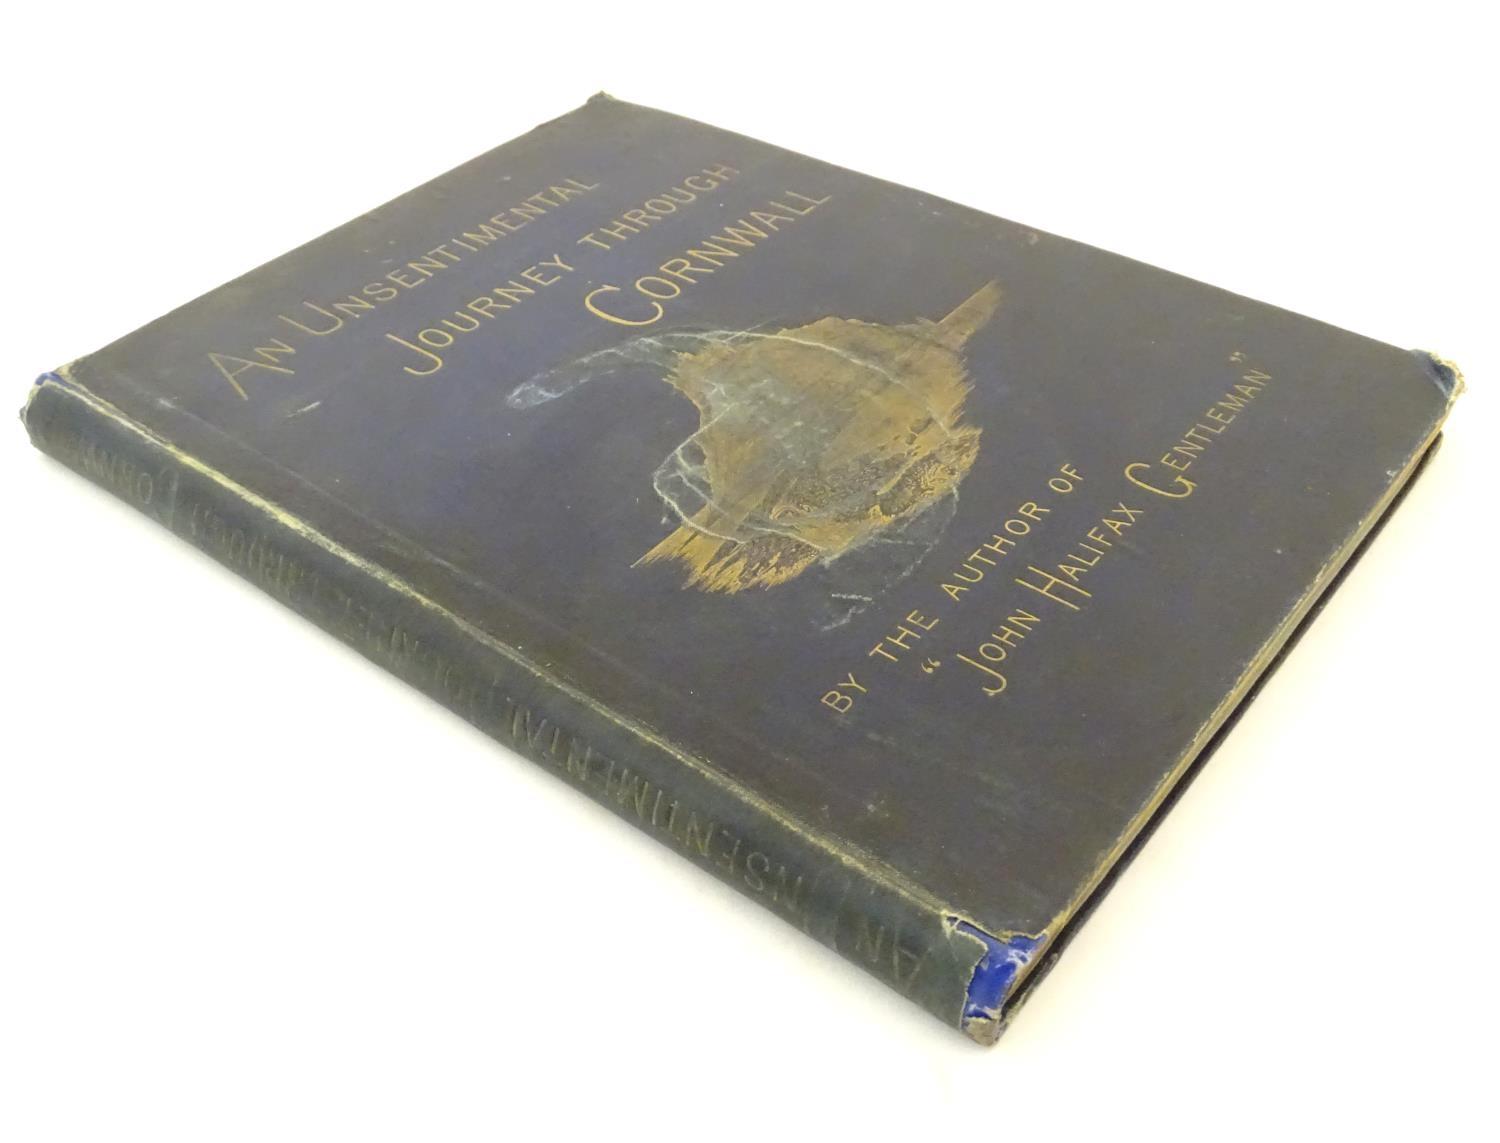 Book: An Unsentimental Journey through Cornwall, by Dinah Mulock Craik, illustrated by C. Napier